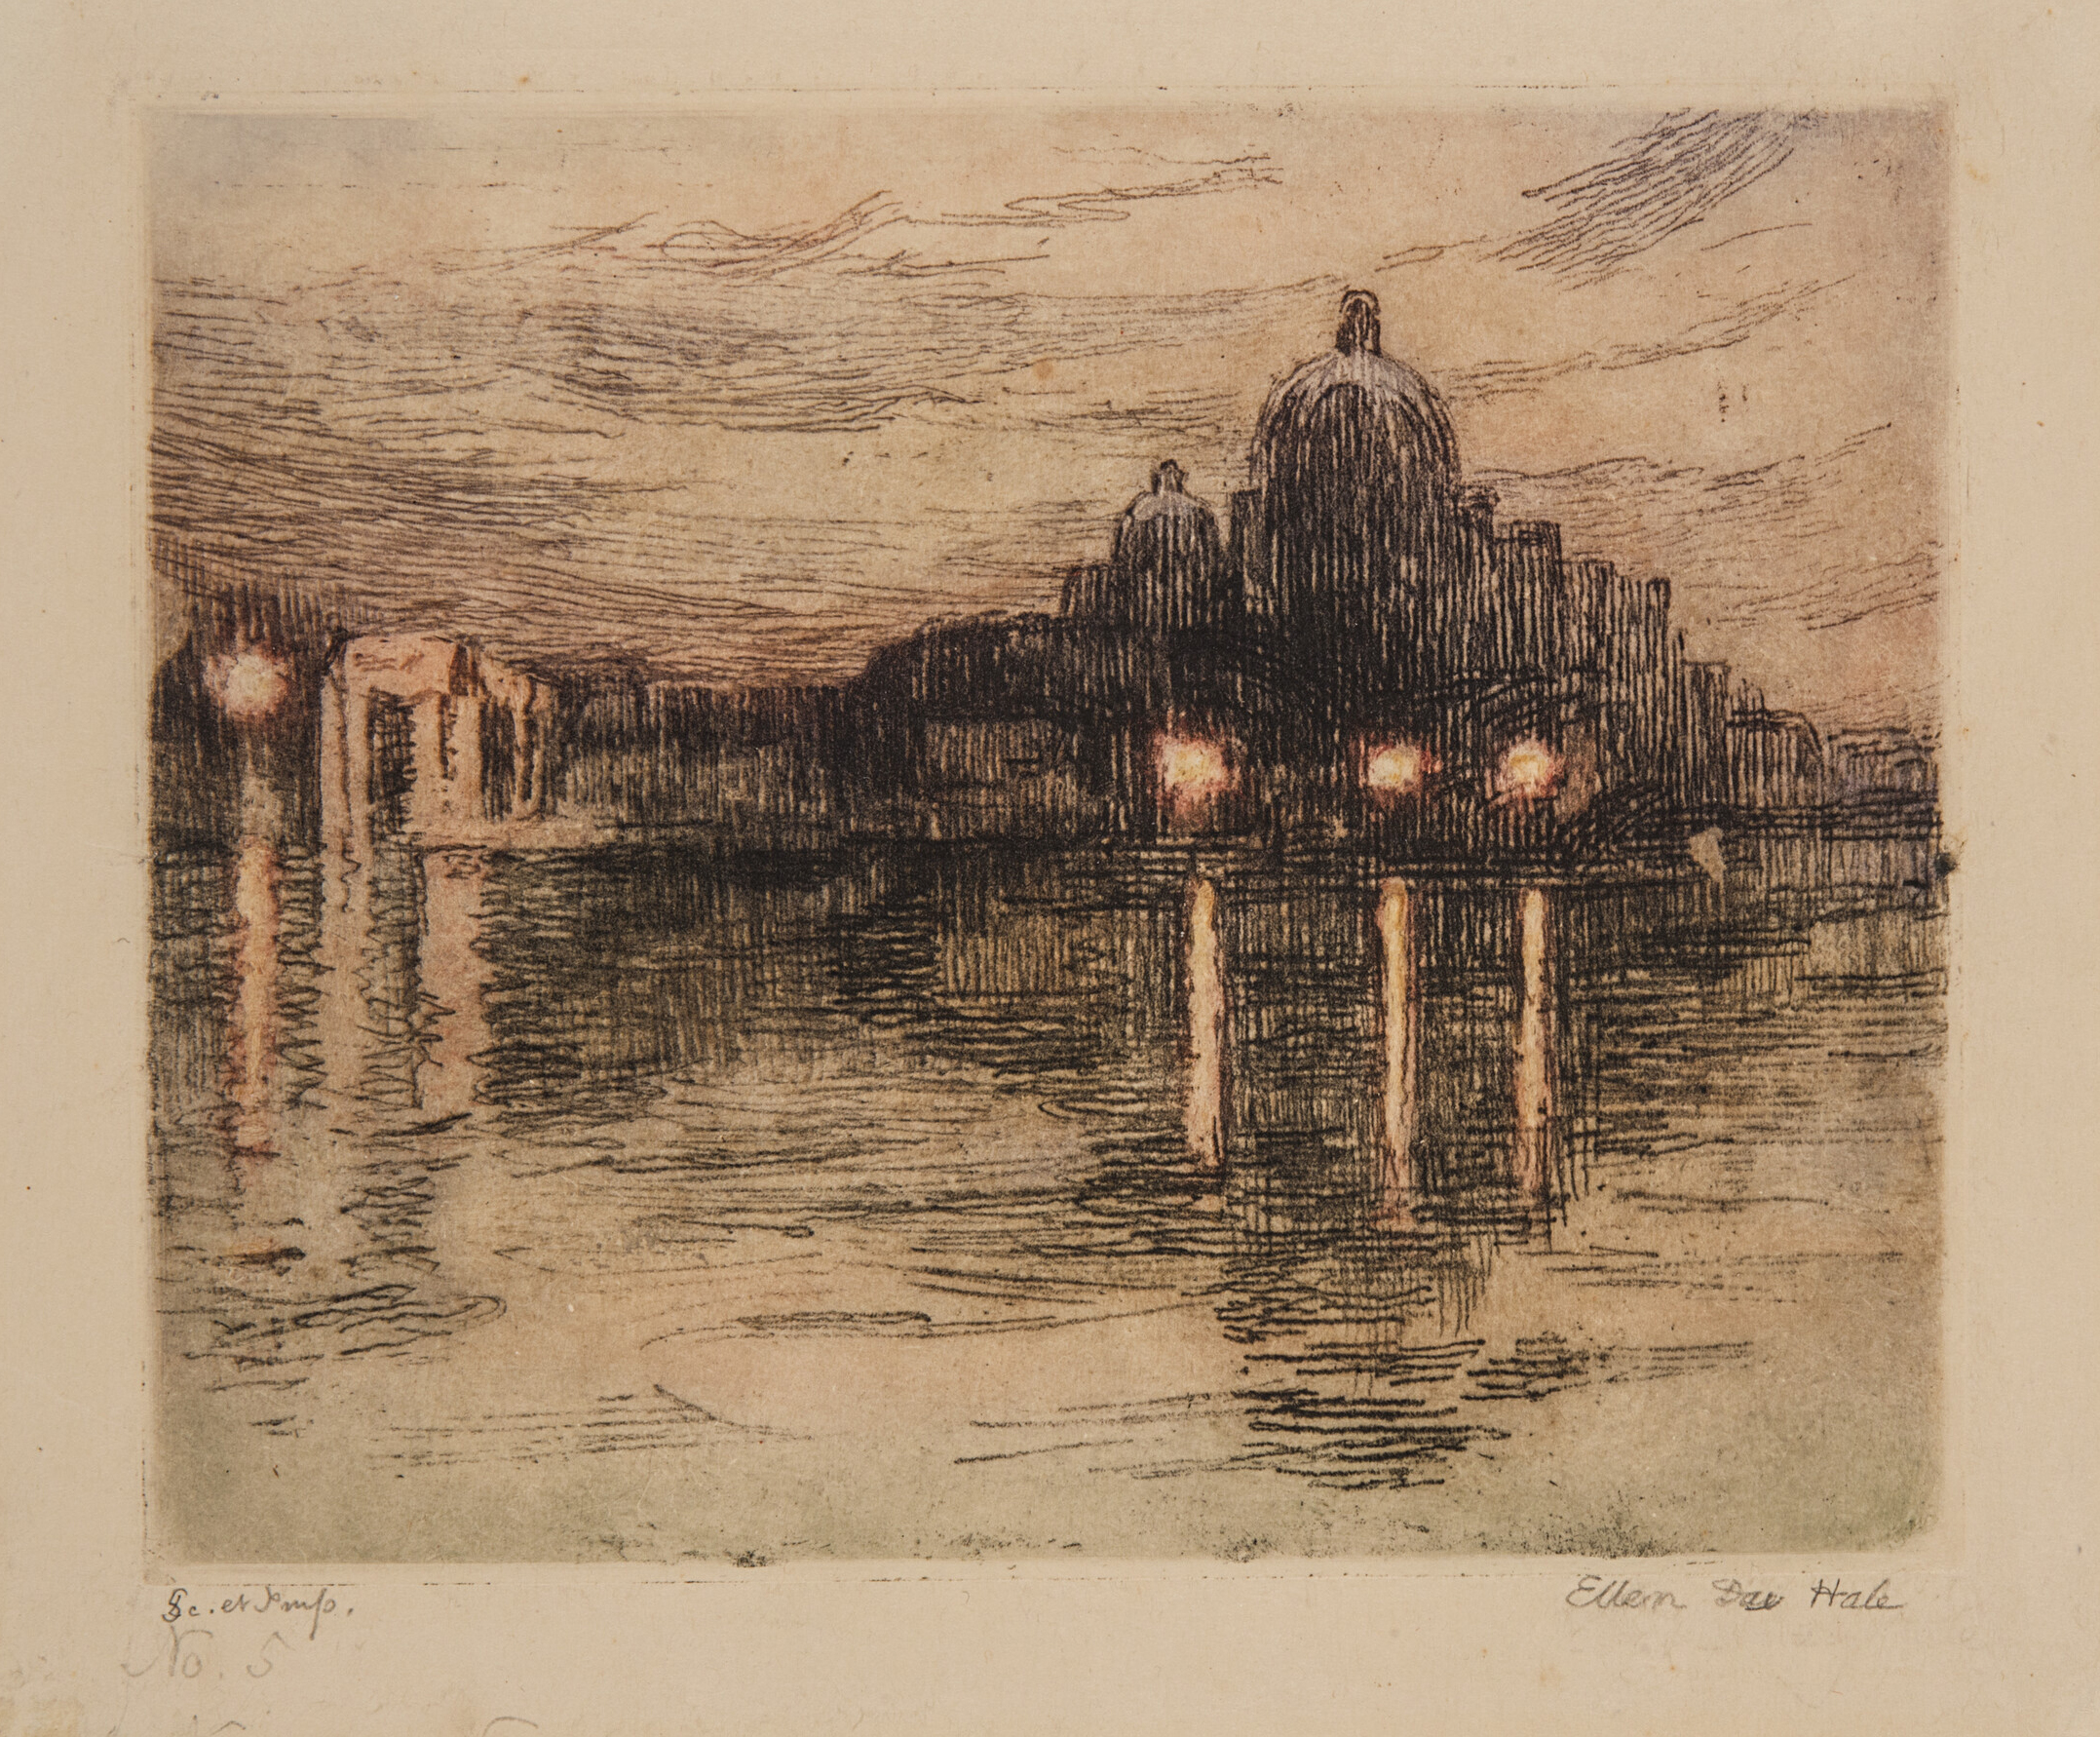 The skyline of Venice sits on the horizon, casting a hazy reflection of buildings and light in the water against a tan-golden background. The etched print has many thin, wavy, black horizontal lines to denote water and the sky in contrast to the tighter, more vertical lines of the buildings.